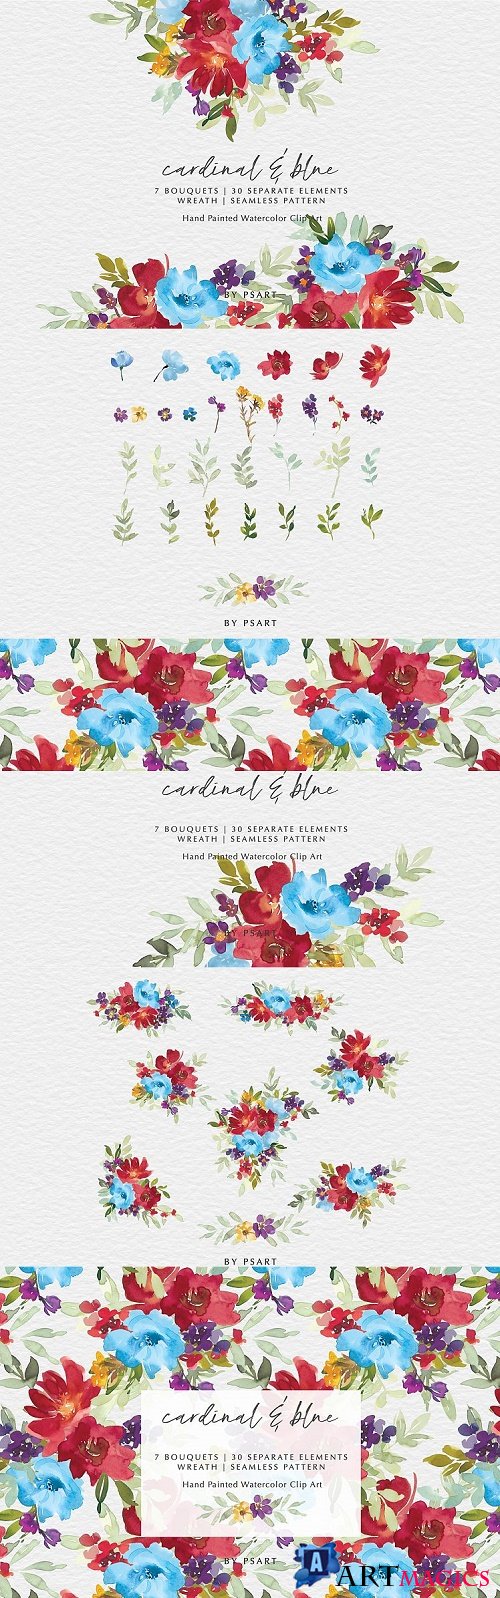 Cardinal & Blue Watercolor Floral Clipart Collection - 465776